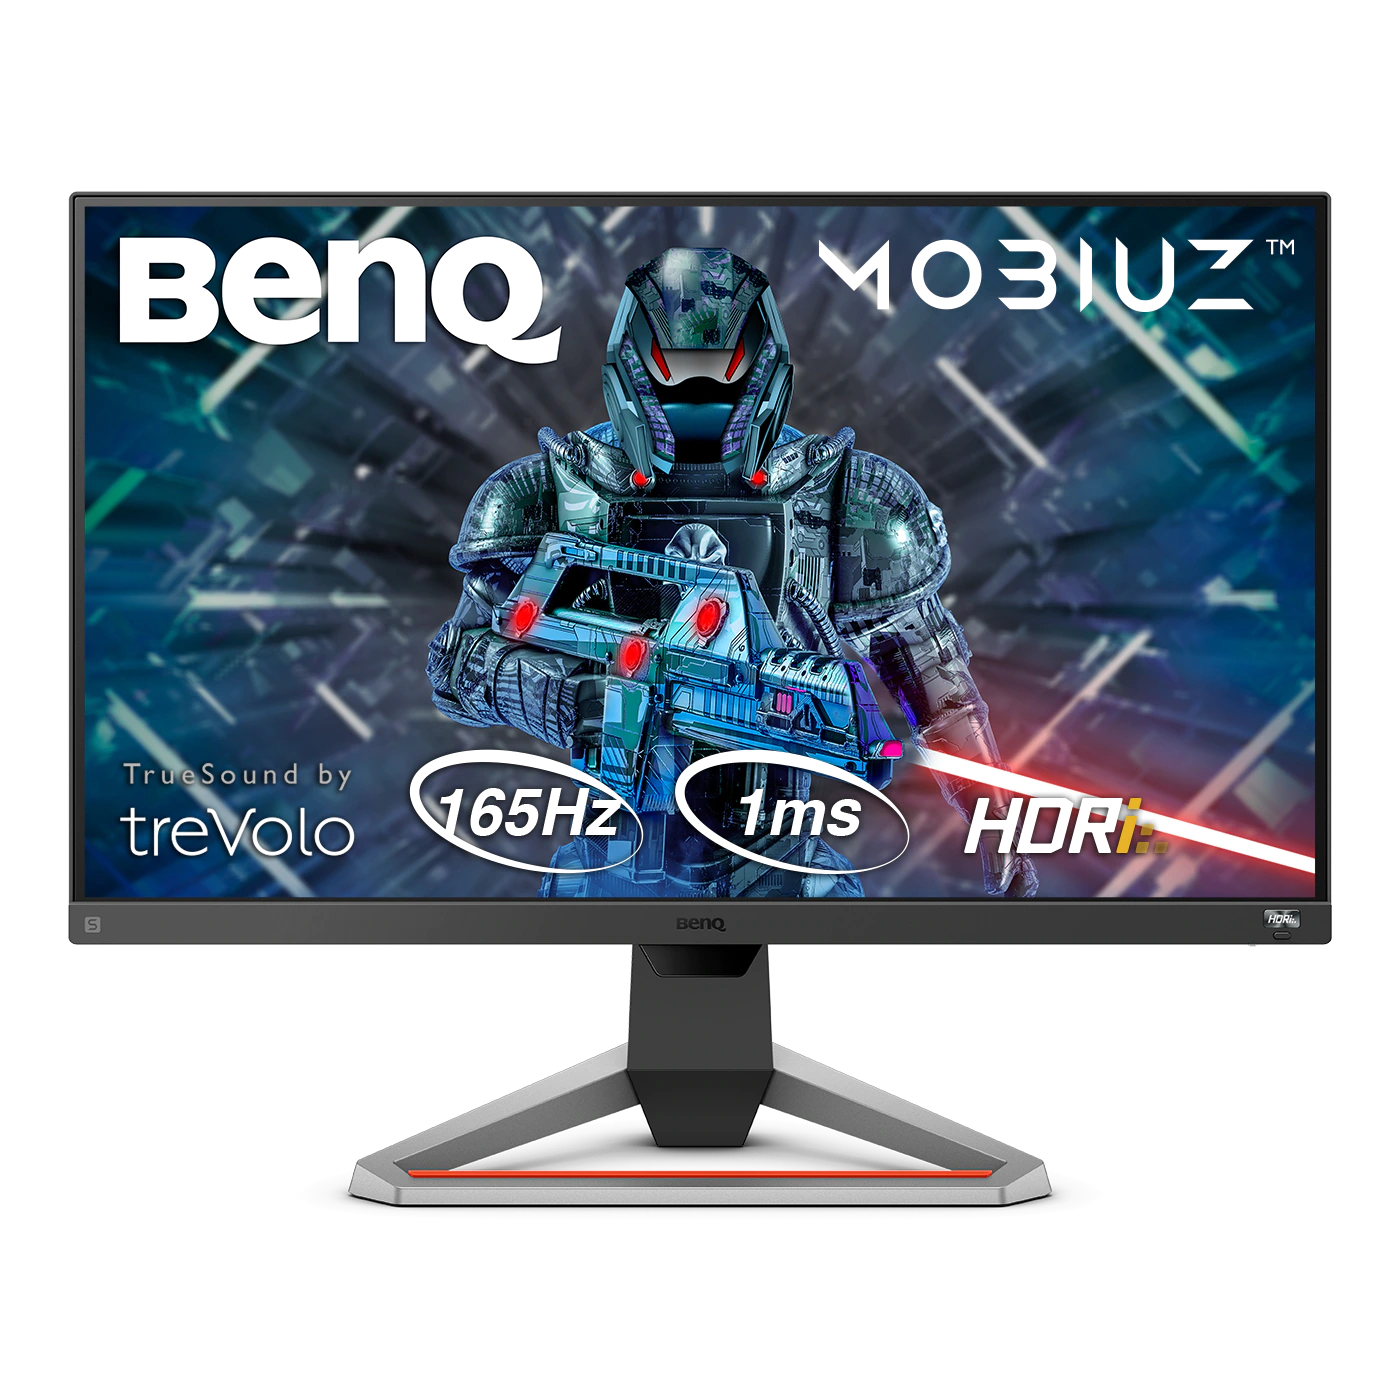 BenQ updates Mobiuz lineup with EX2510S and EX2710S gaming